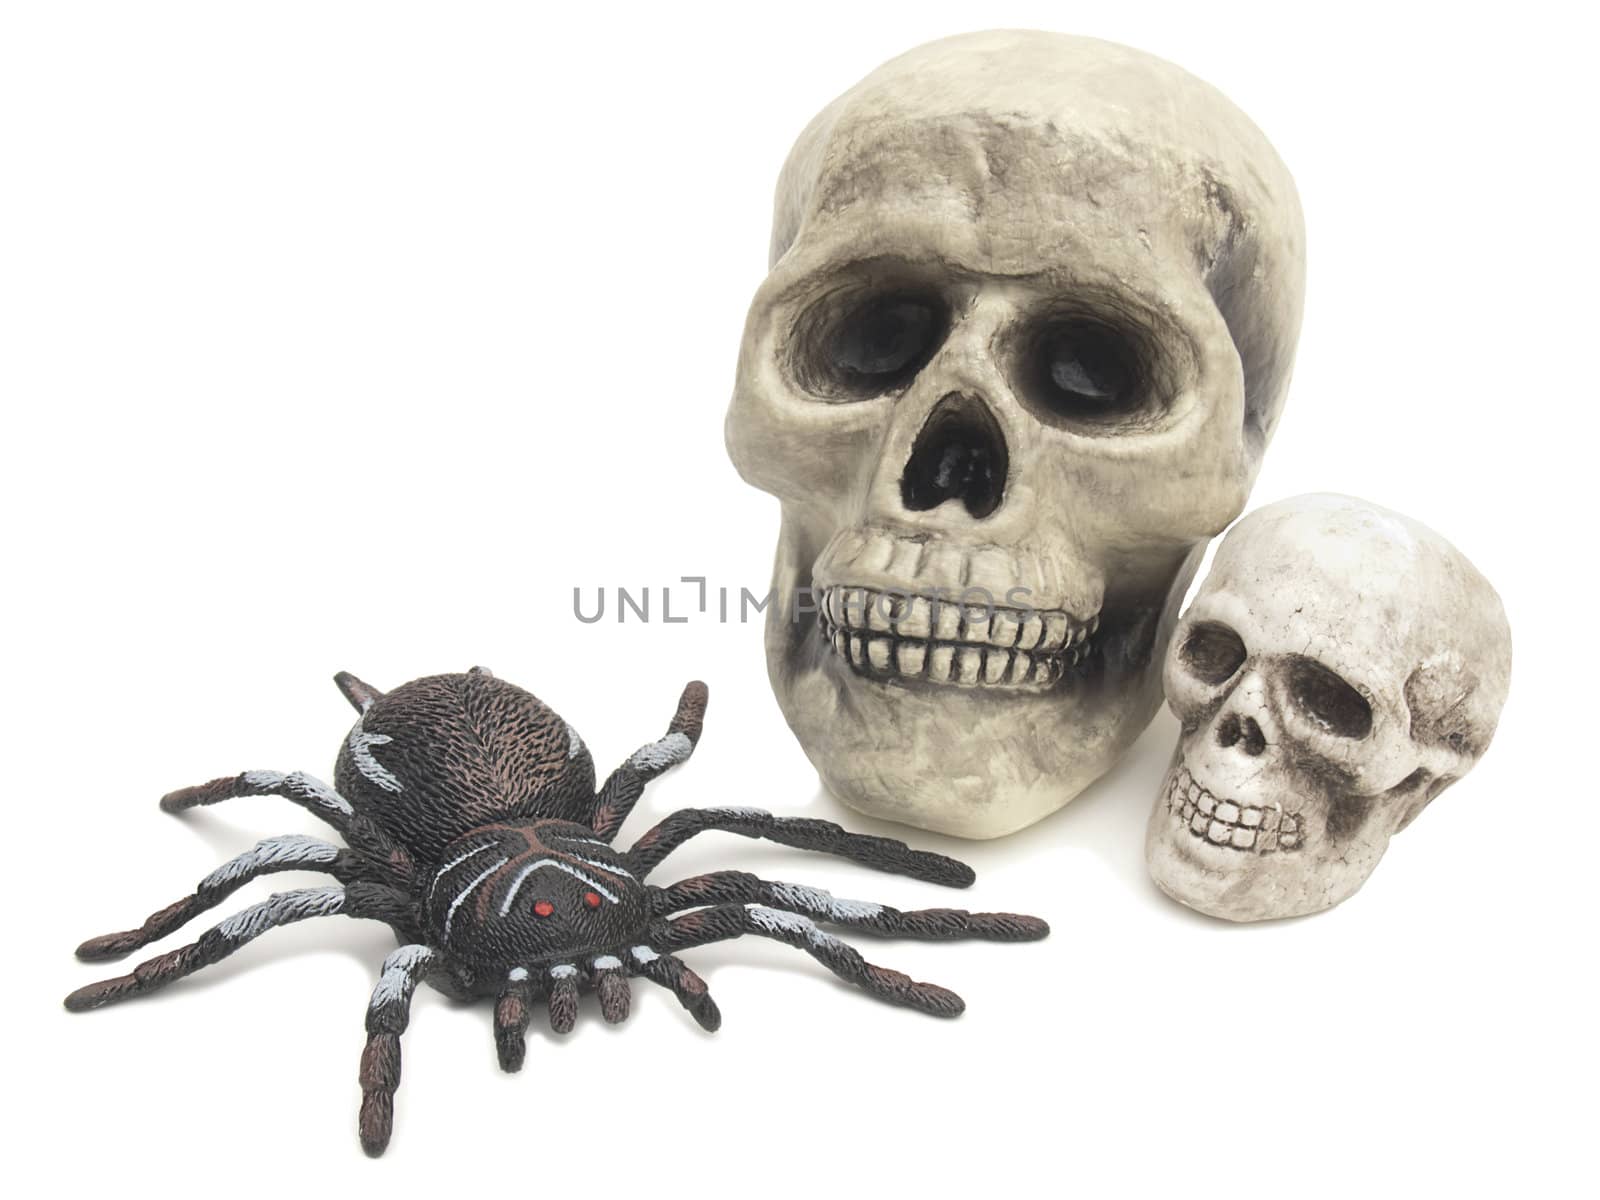 Two comic fake skulls, one large one small, with a rubber spider isolated on white. Fun for Halloween!